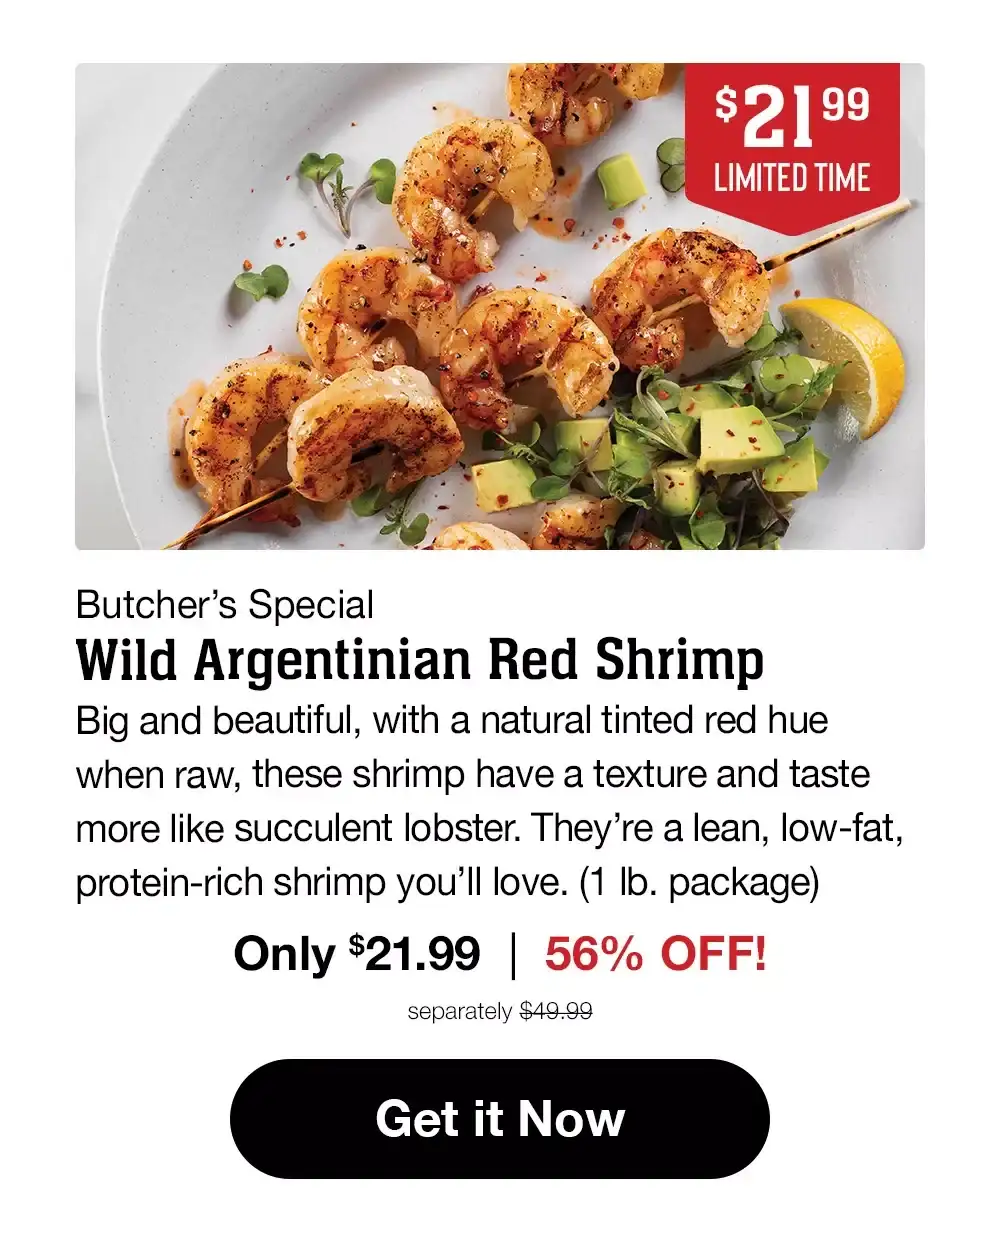 \\$21.99 LIMITED TIME | Butcher's Special Wild Argentinian Red Shrimp | Big and beautiful, with a natural tinted red hue when raw, these shrimp have a texture and taste more like succulent lobster. They're a lean, low-fat, protein-rich shrimp you'll love. (1 lb. package) Only \\$21.99 | 56% OFF! separately \\$49.99 || Get it Now